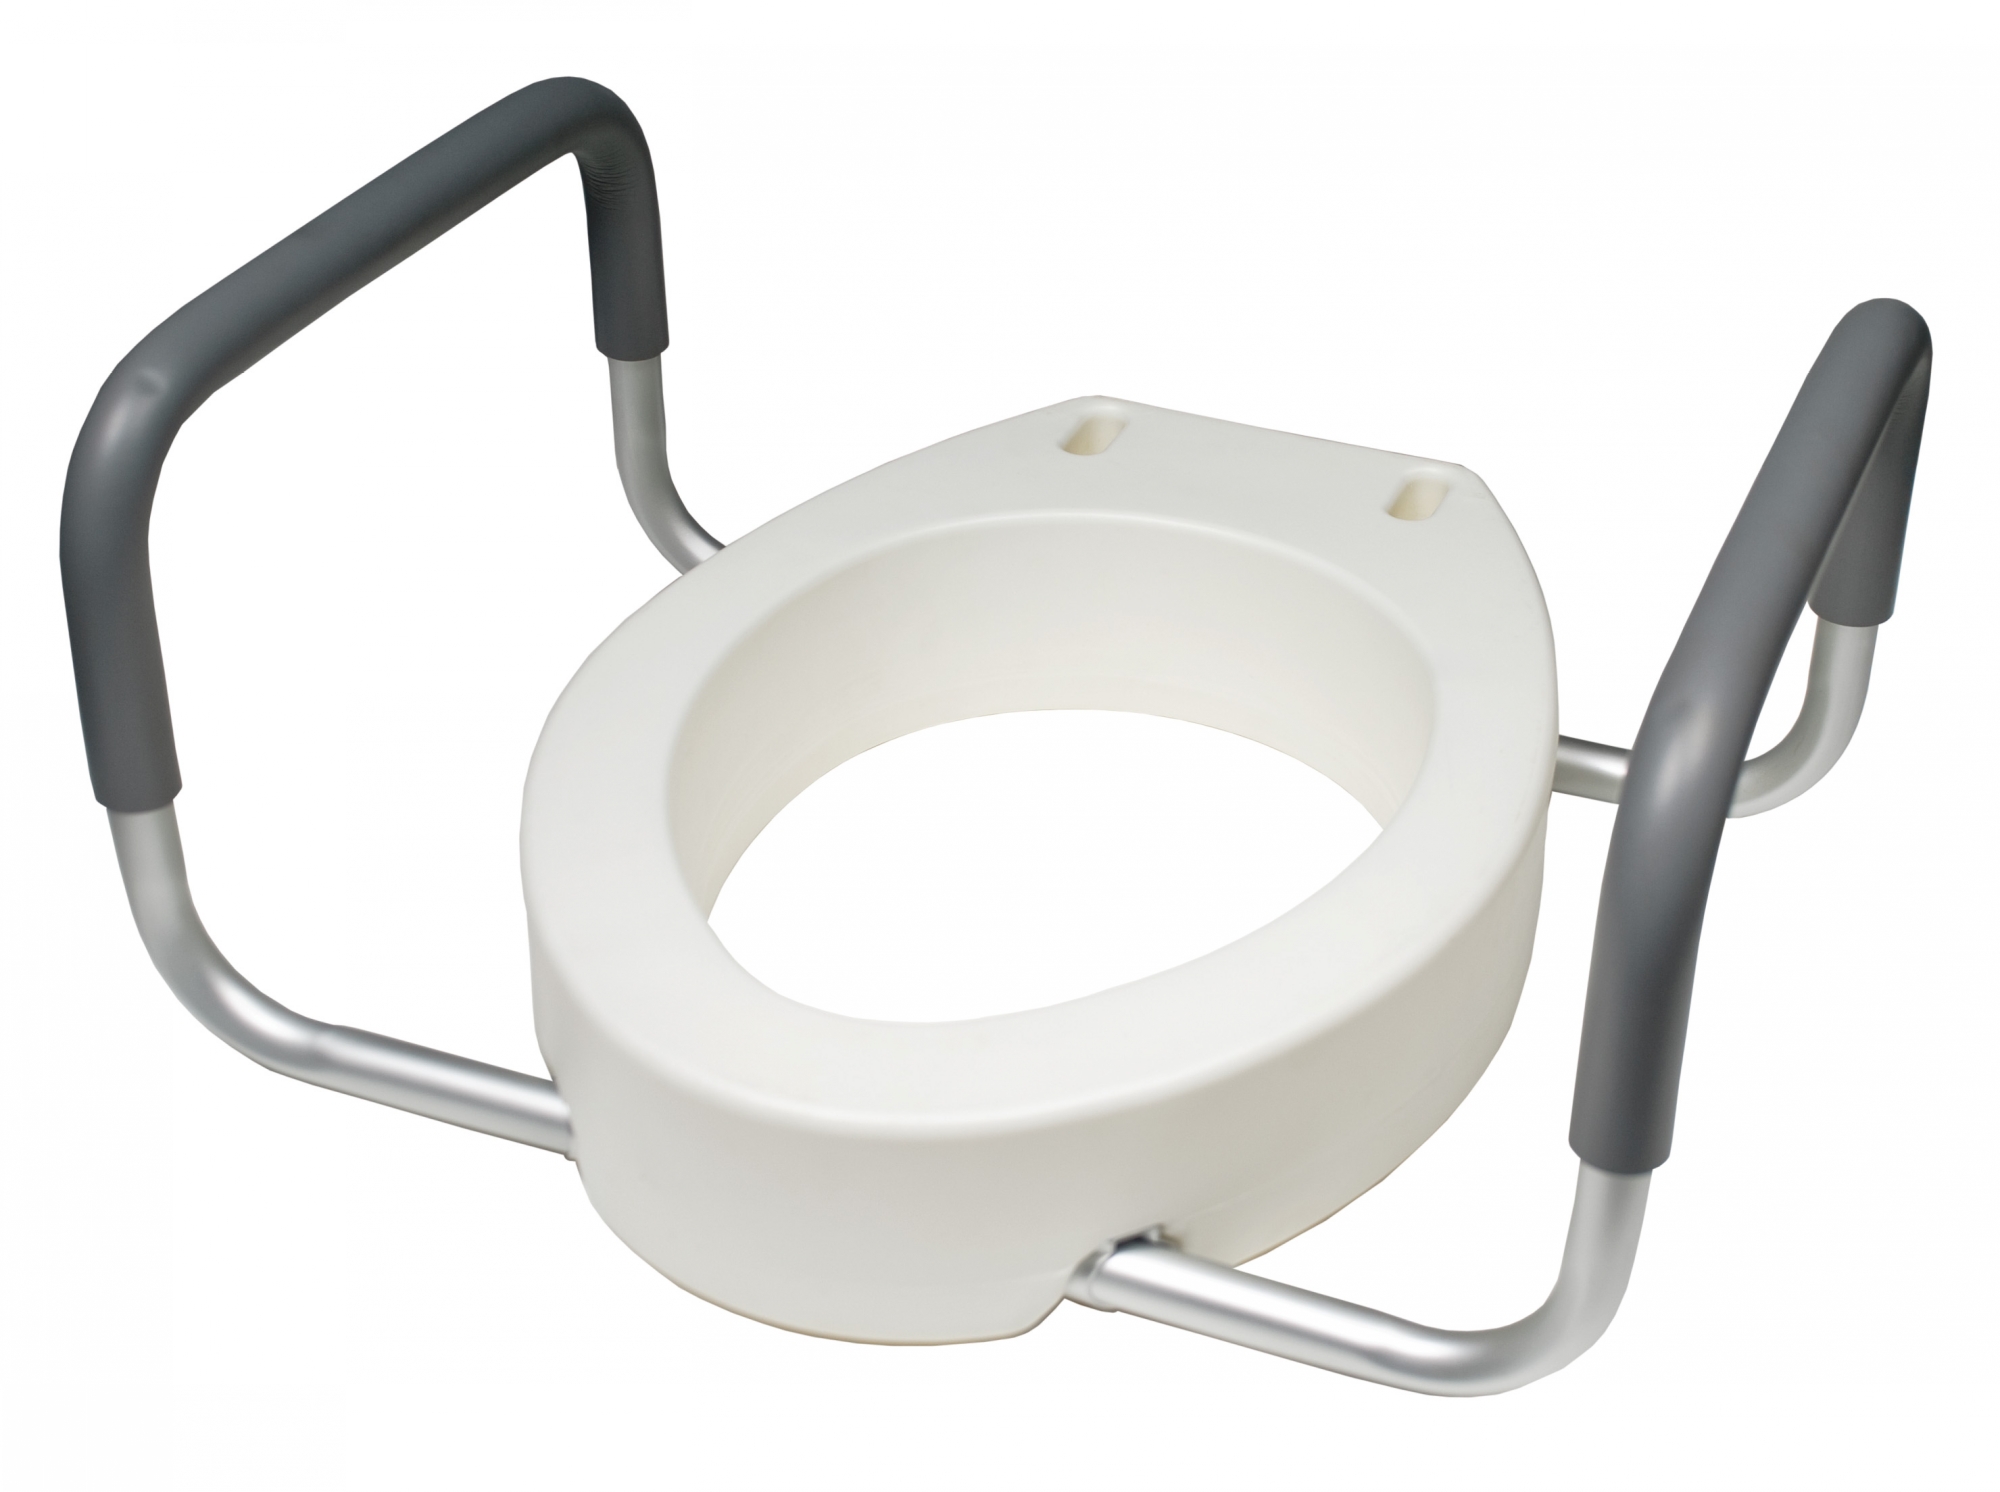 TOILET SEAT RISERS 4″ - Ray Fisher Pharmacy & Medical Supplies